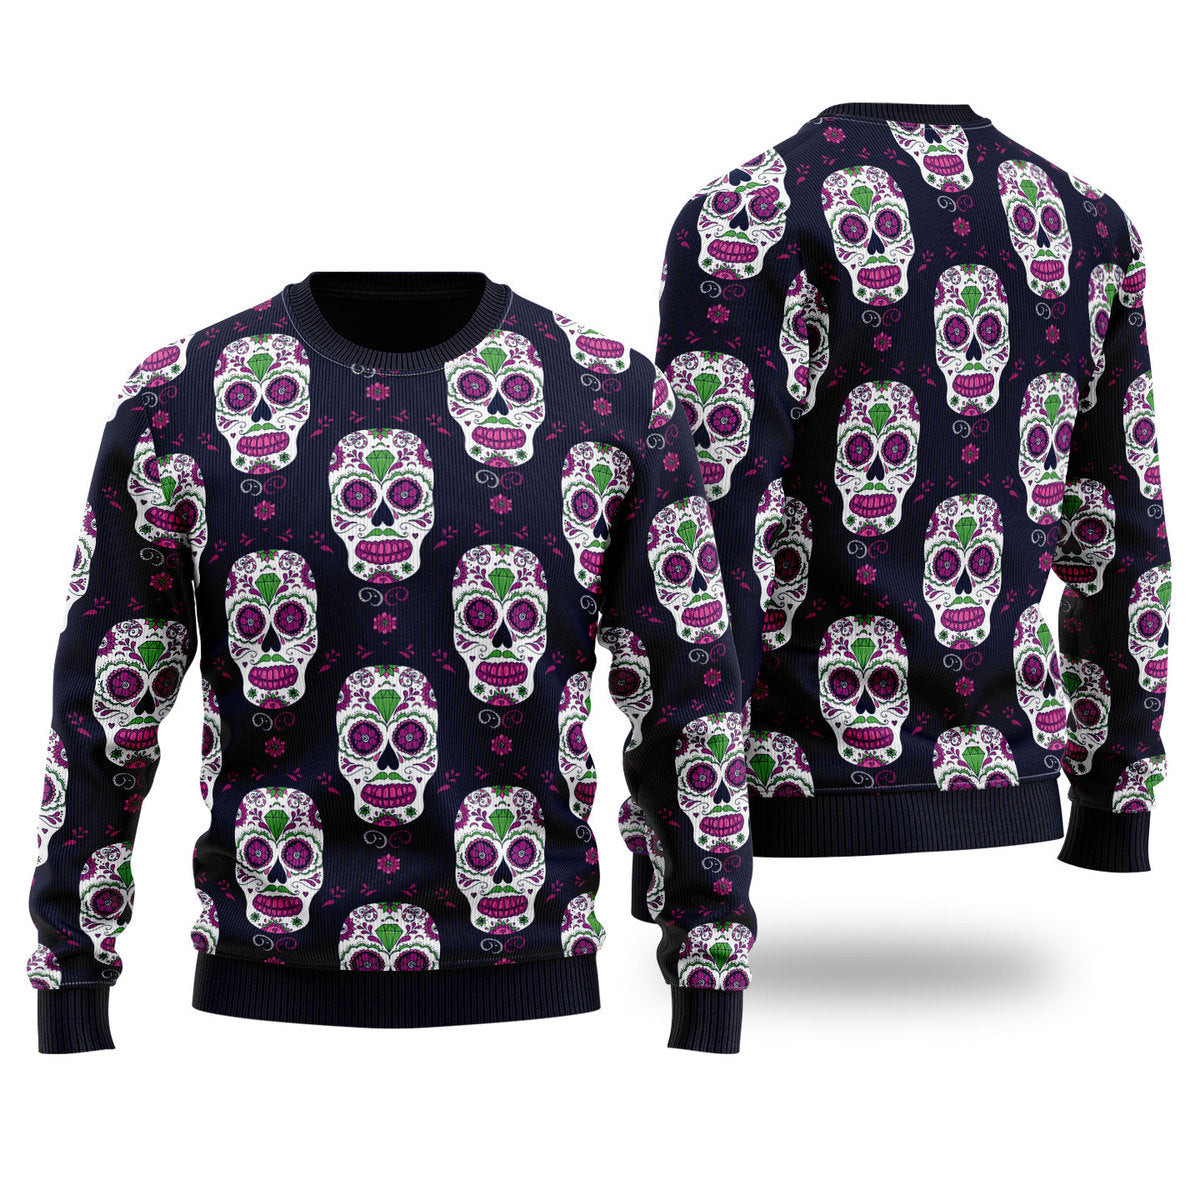 Mexican Day Sugar Skull Ugly Christmas Sweater Ugly Sweater For Men Women